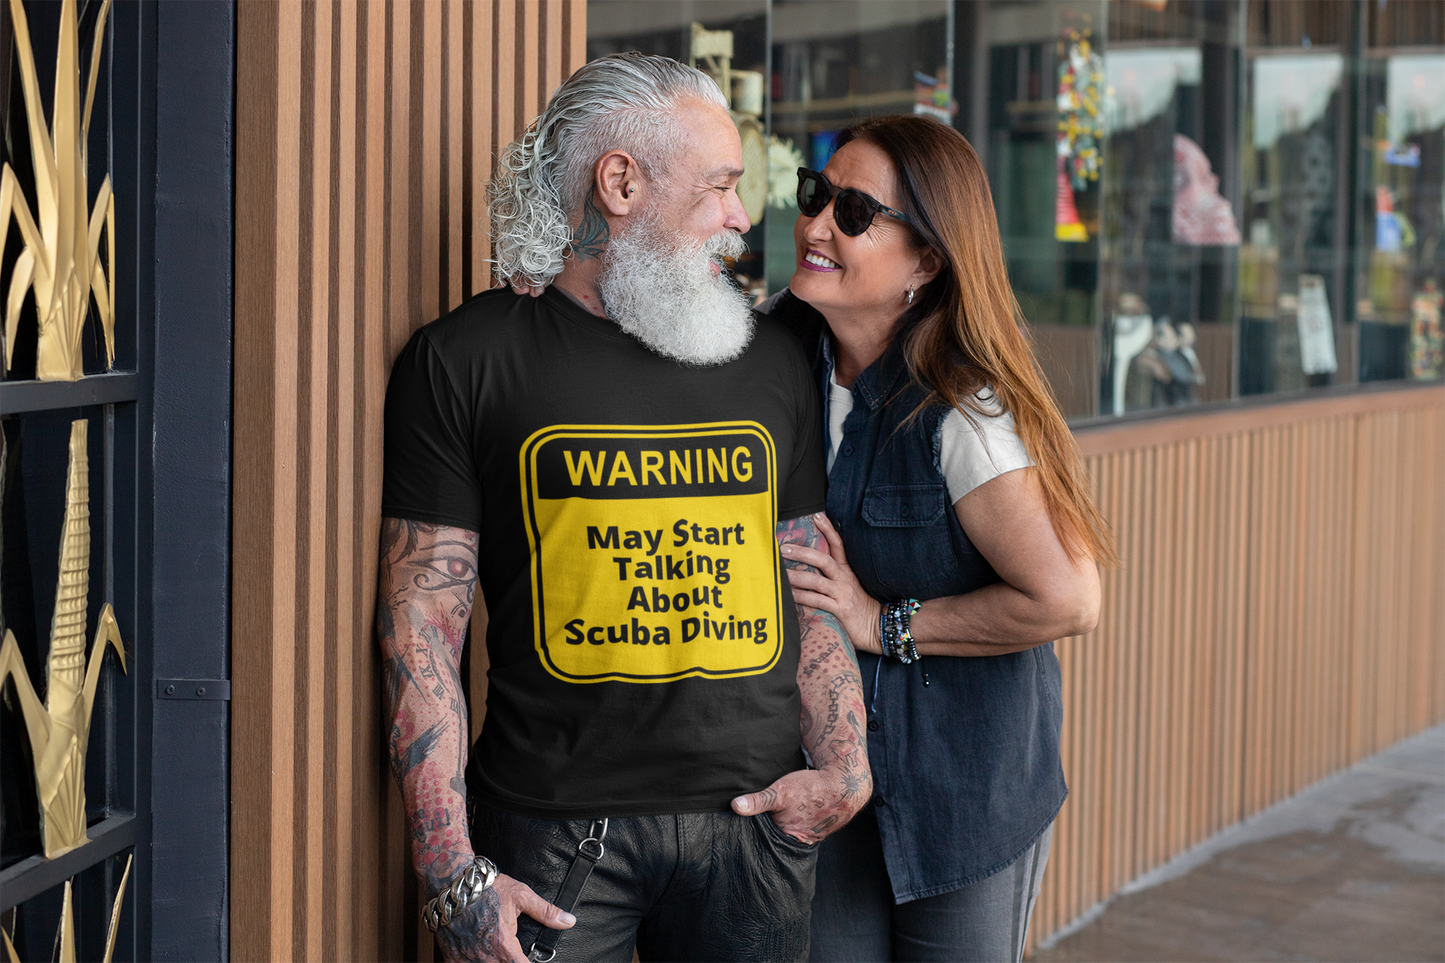 Warning: may start talking about scuba diving black t-shirt worn by a gentleman with tattoos and beard talking to a woman outside a cafe